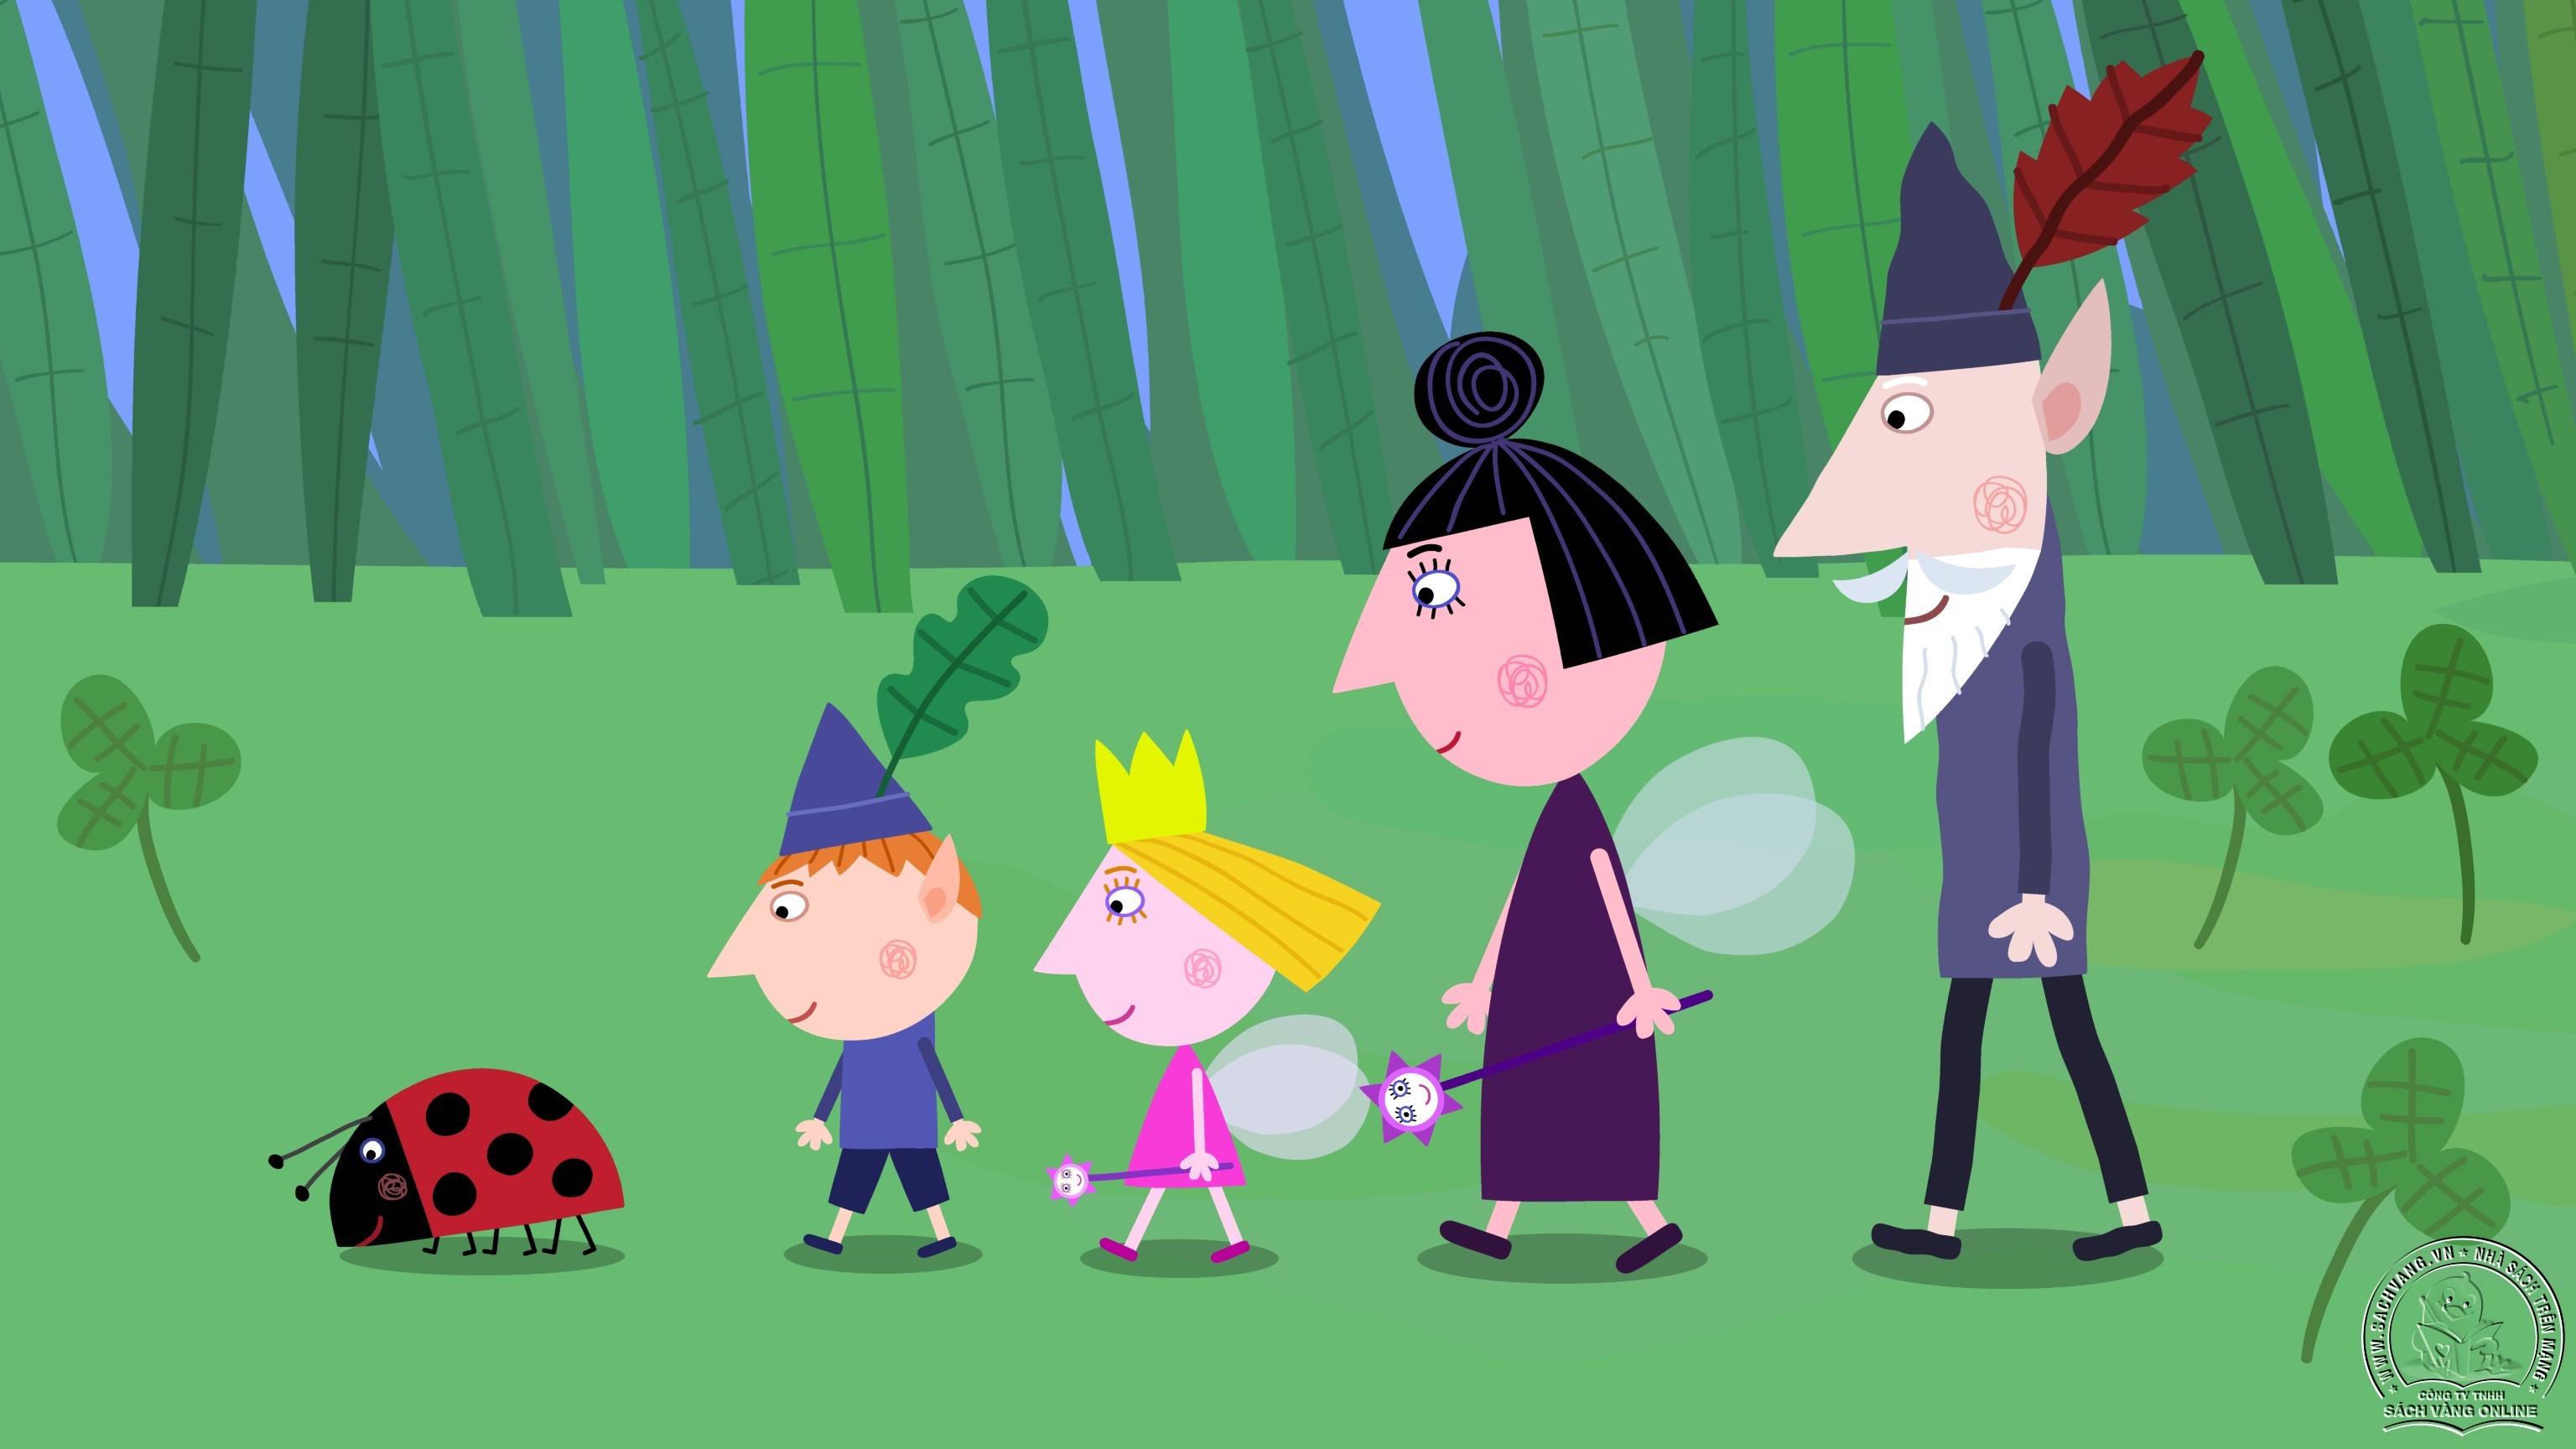 3072x1728 Ben and Holly's Little Kingdom - 2